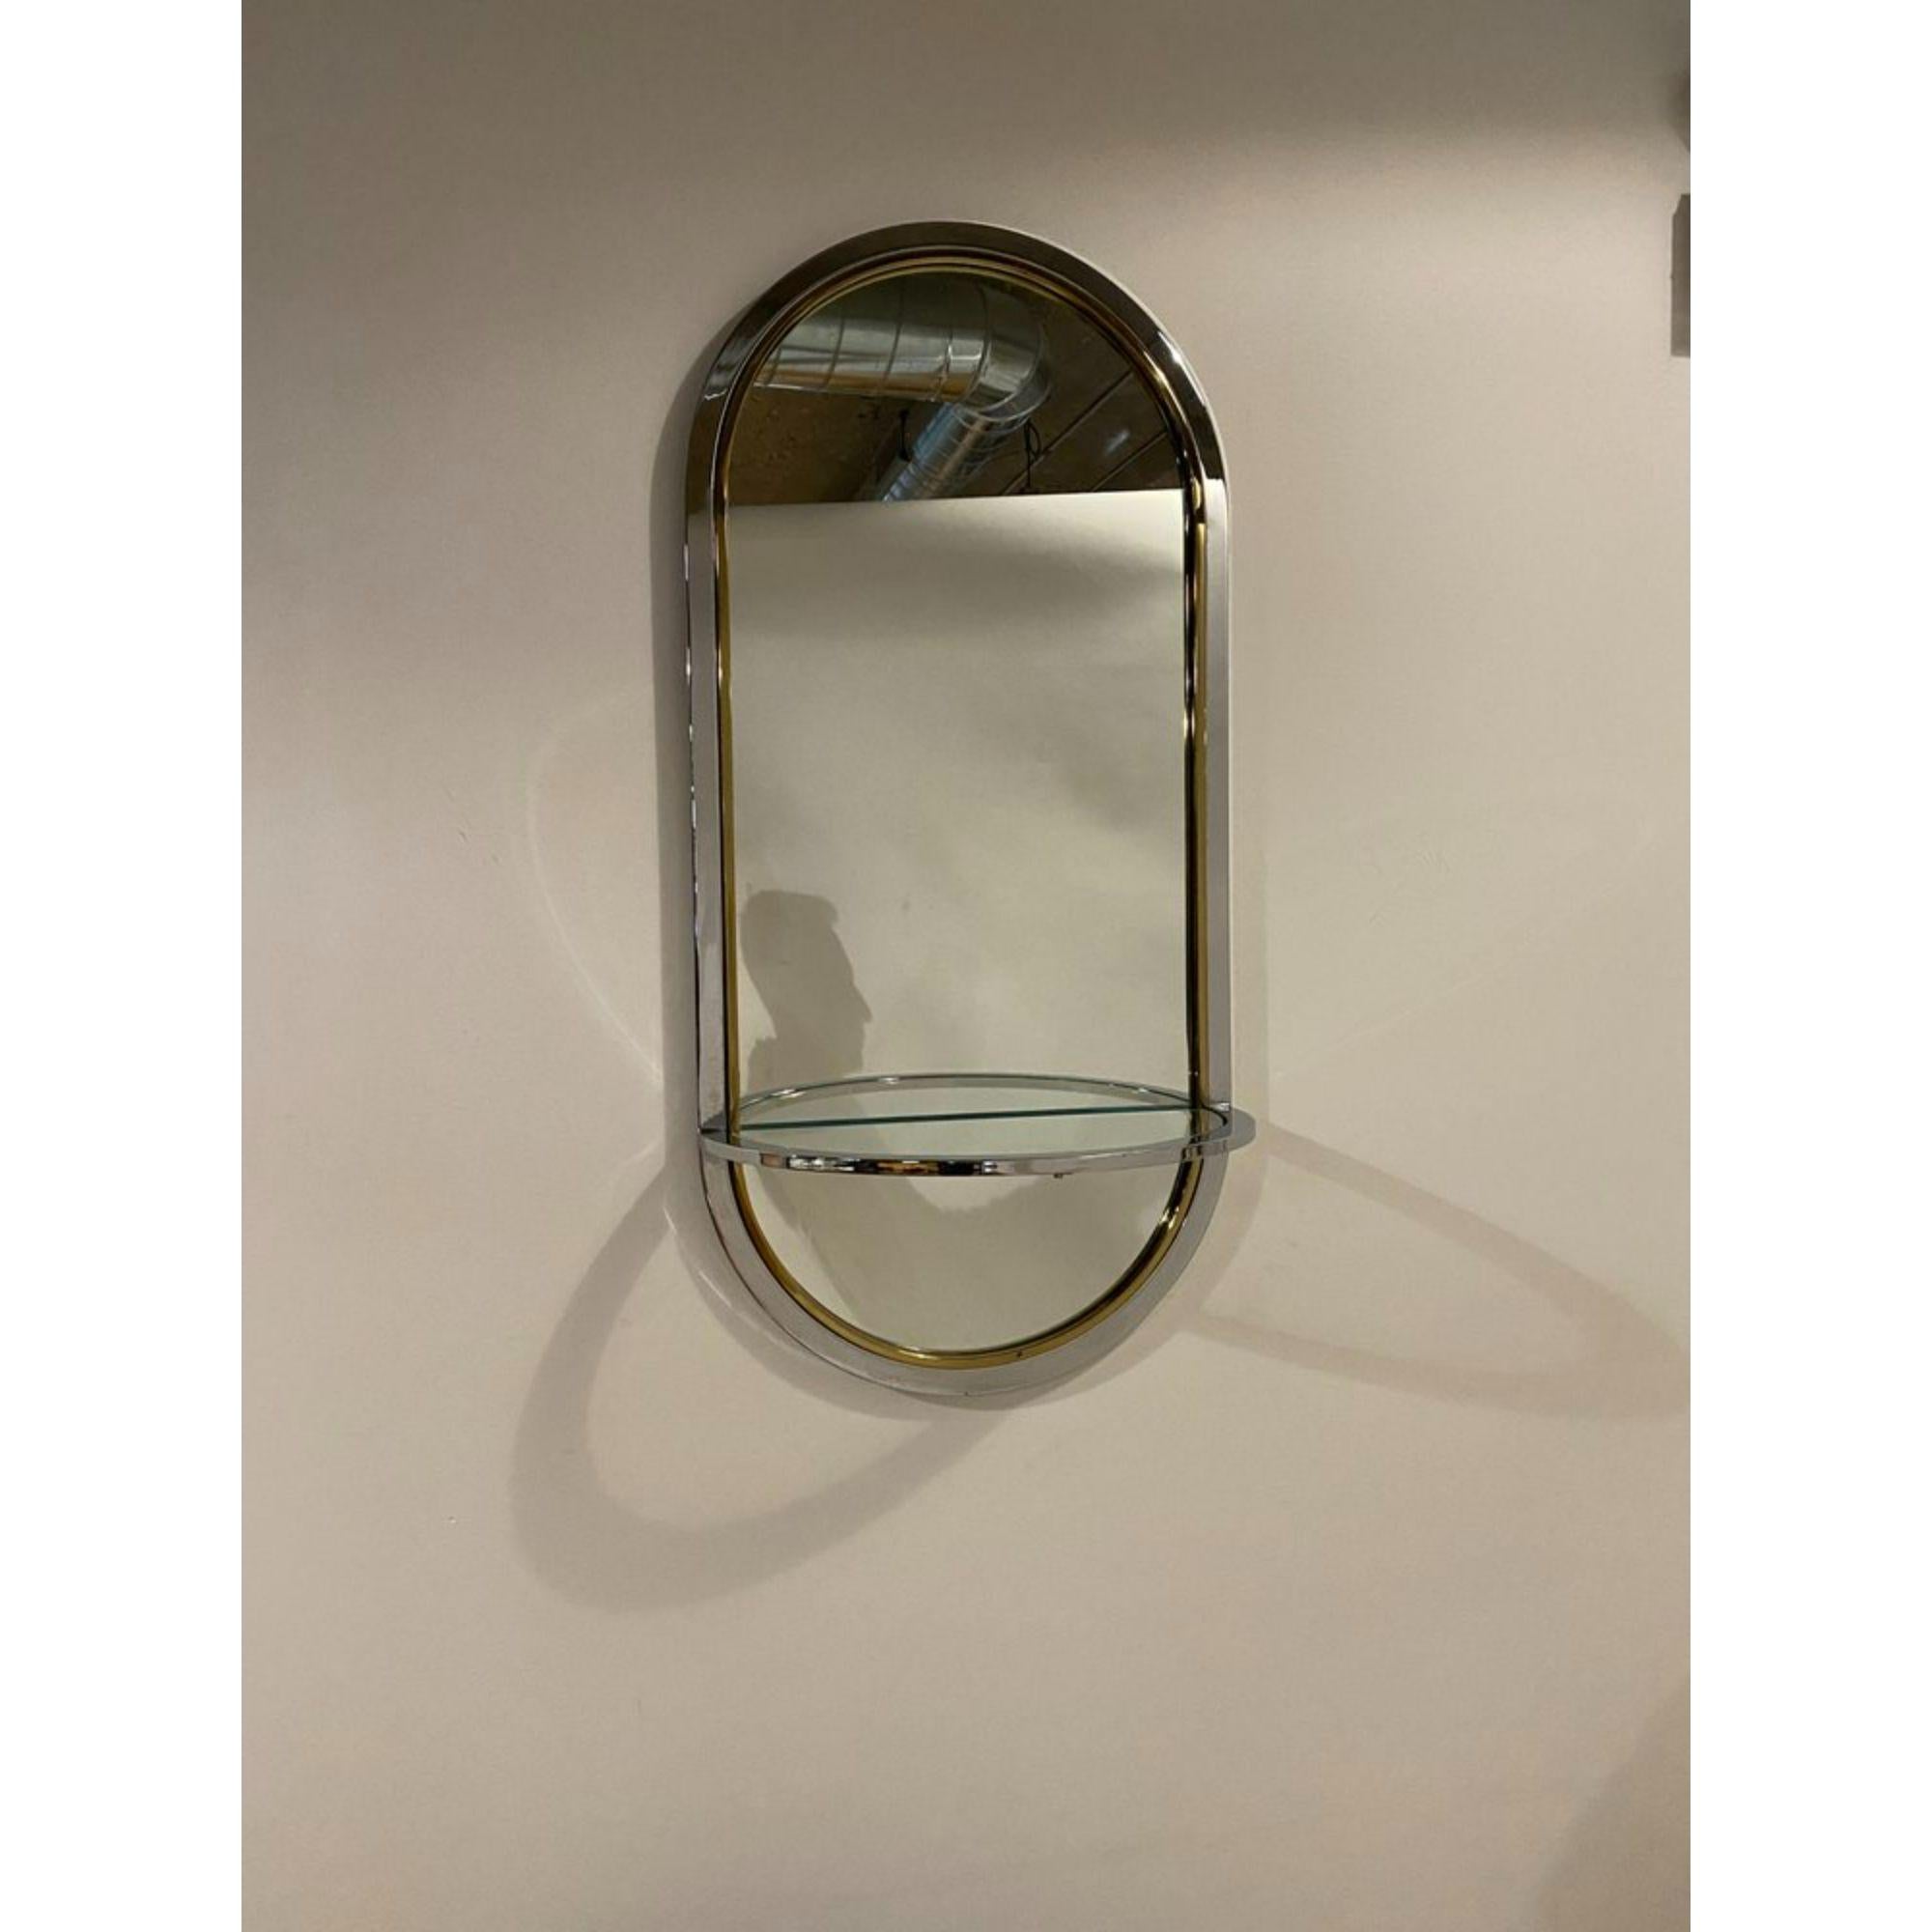 Postmodern chrome and brass racetrack wall mirror with a glass console shelf by Leon Rosen for Pace, 1970's.

Additional Information:
Materials: Brass Chrome Mirror
Color: Silver, gold
Style: Mid-Century Modern, Modern, Postmodern
Brand: Pace